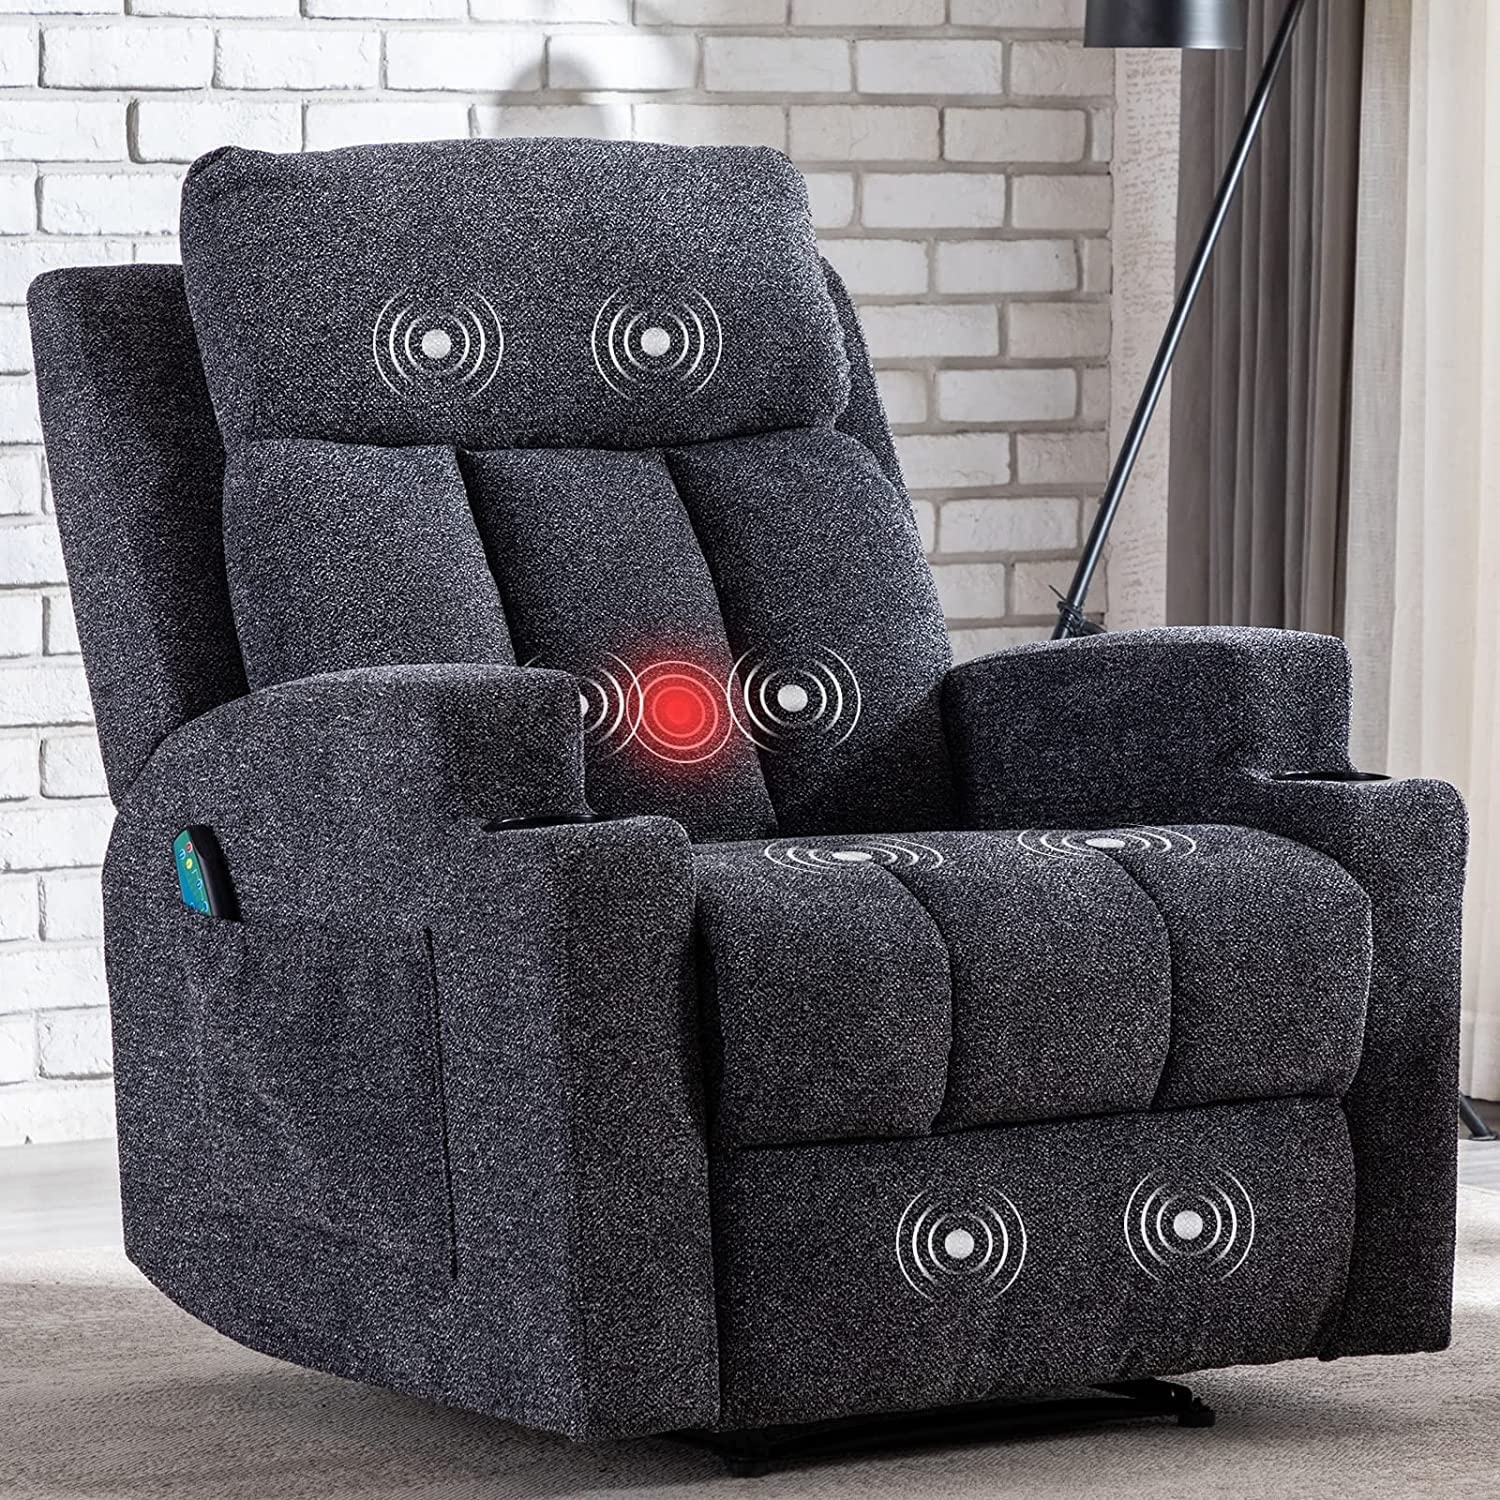 ANJ Massage Recliner Chairs with Cup Holders Breathable Fabric Manual Recliner